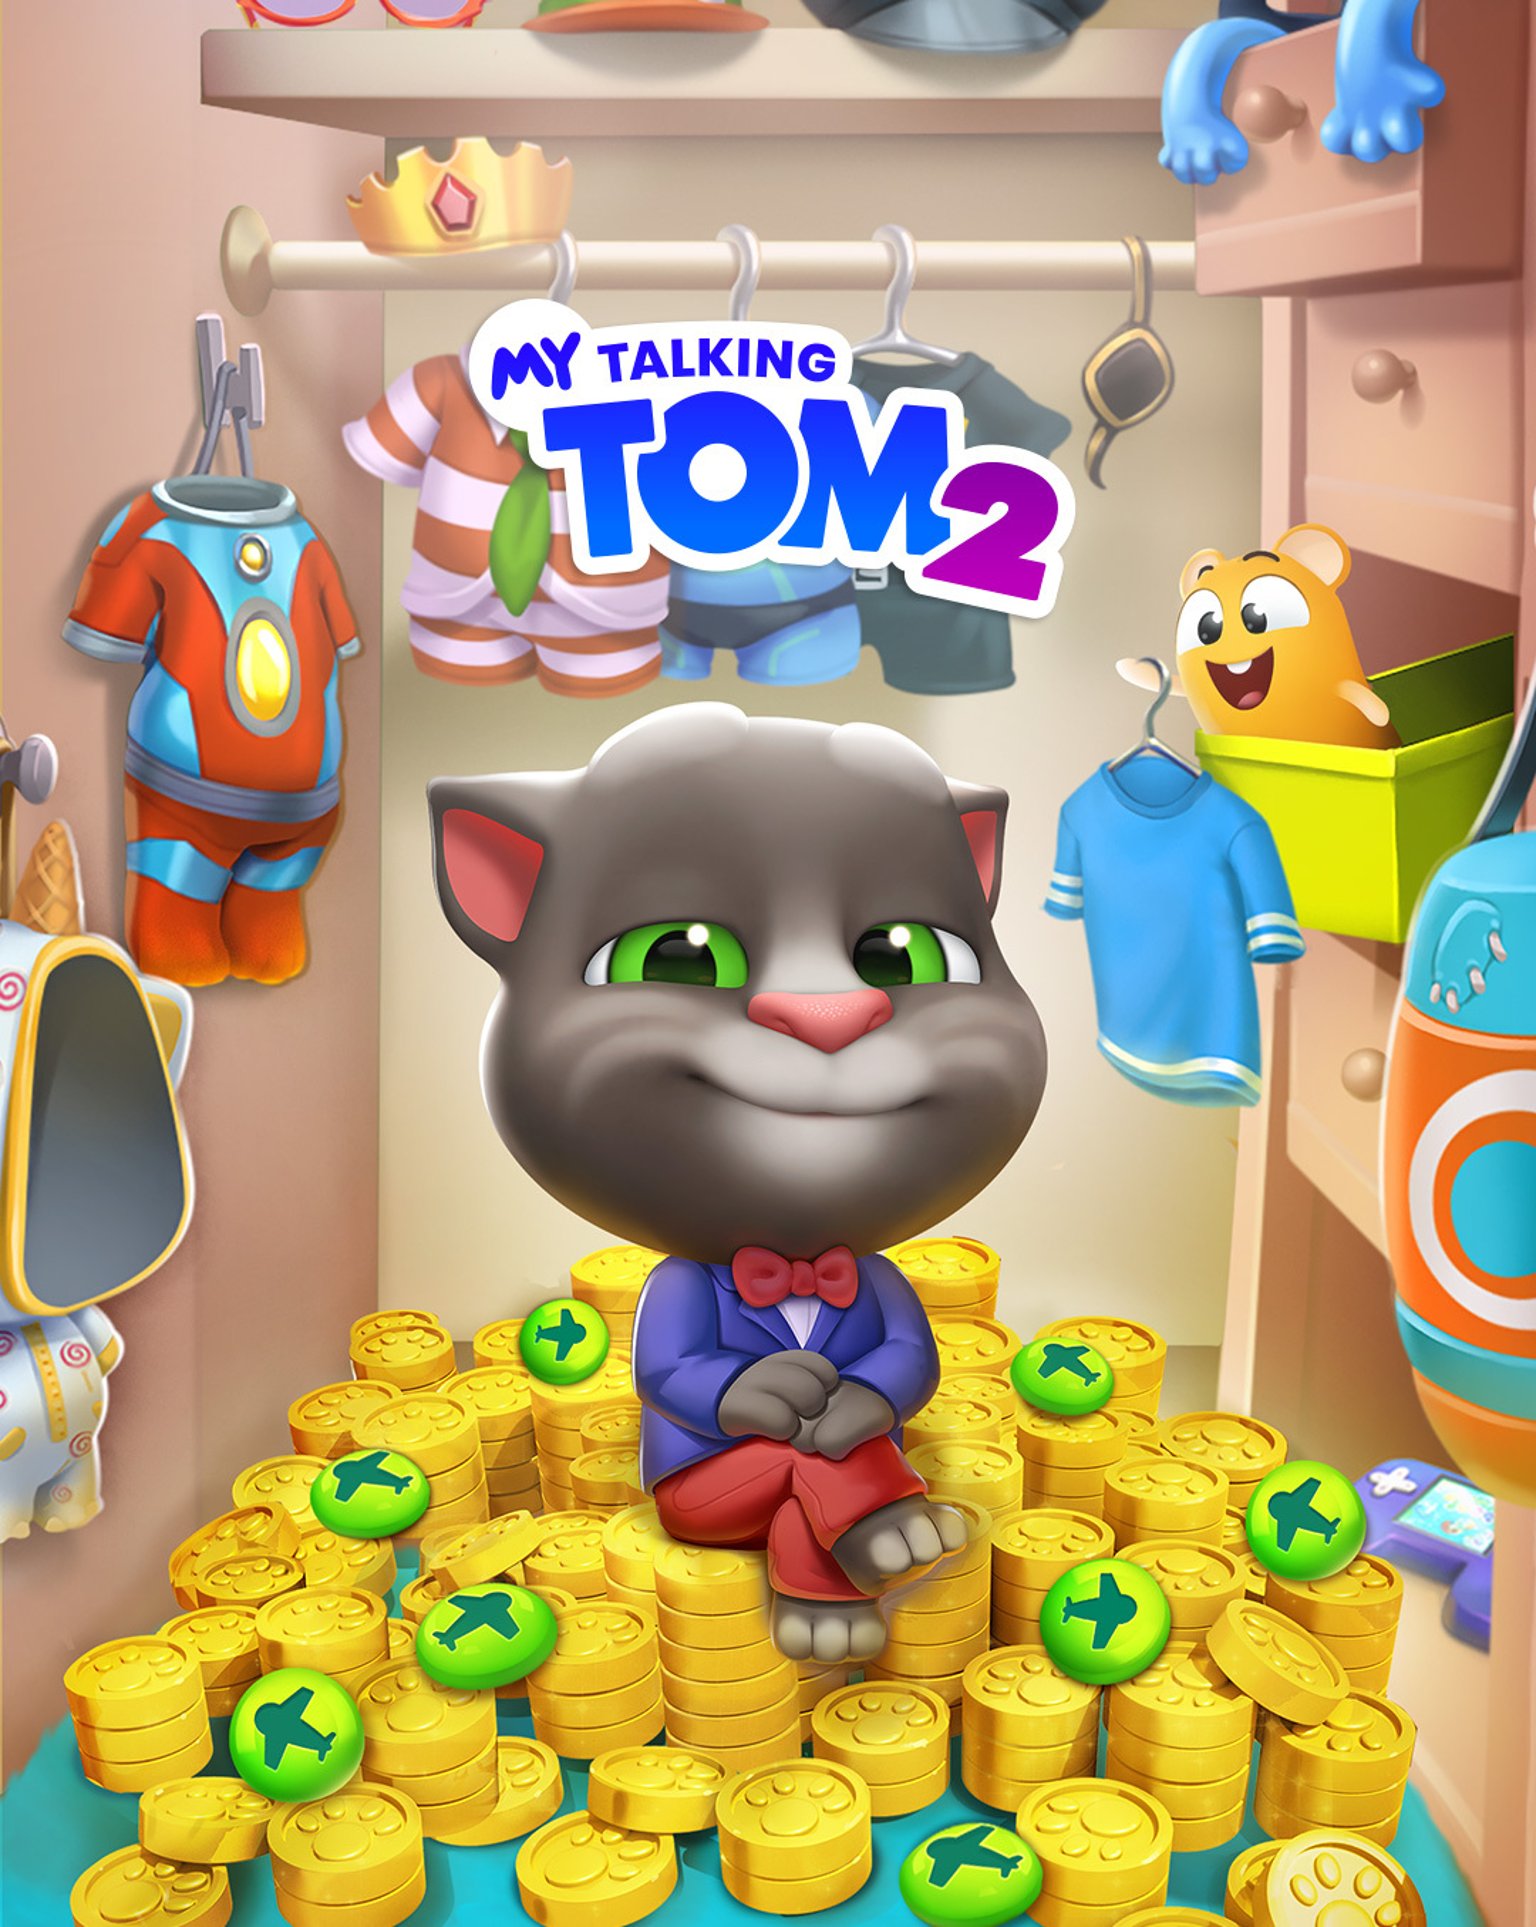 Talking Tom Gives 100,000 Gold Coins to Celebrate his 10th Birthday